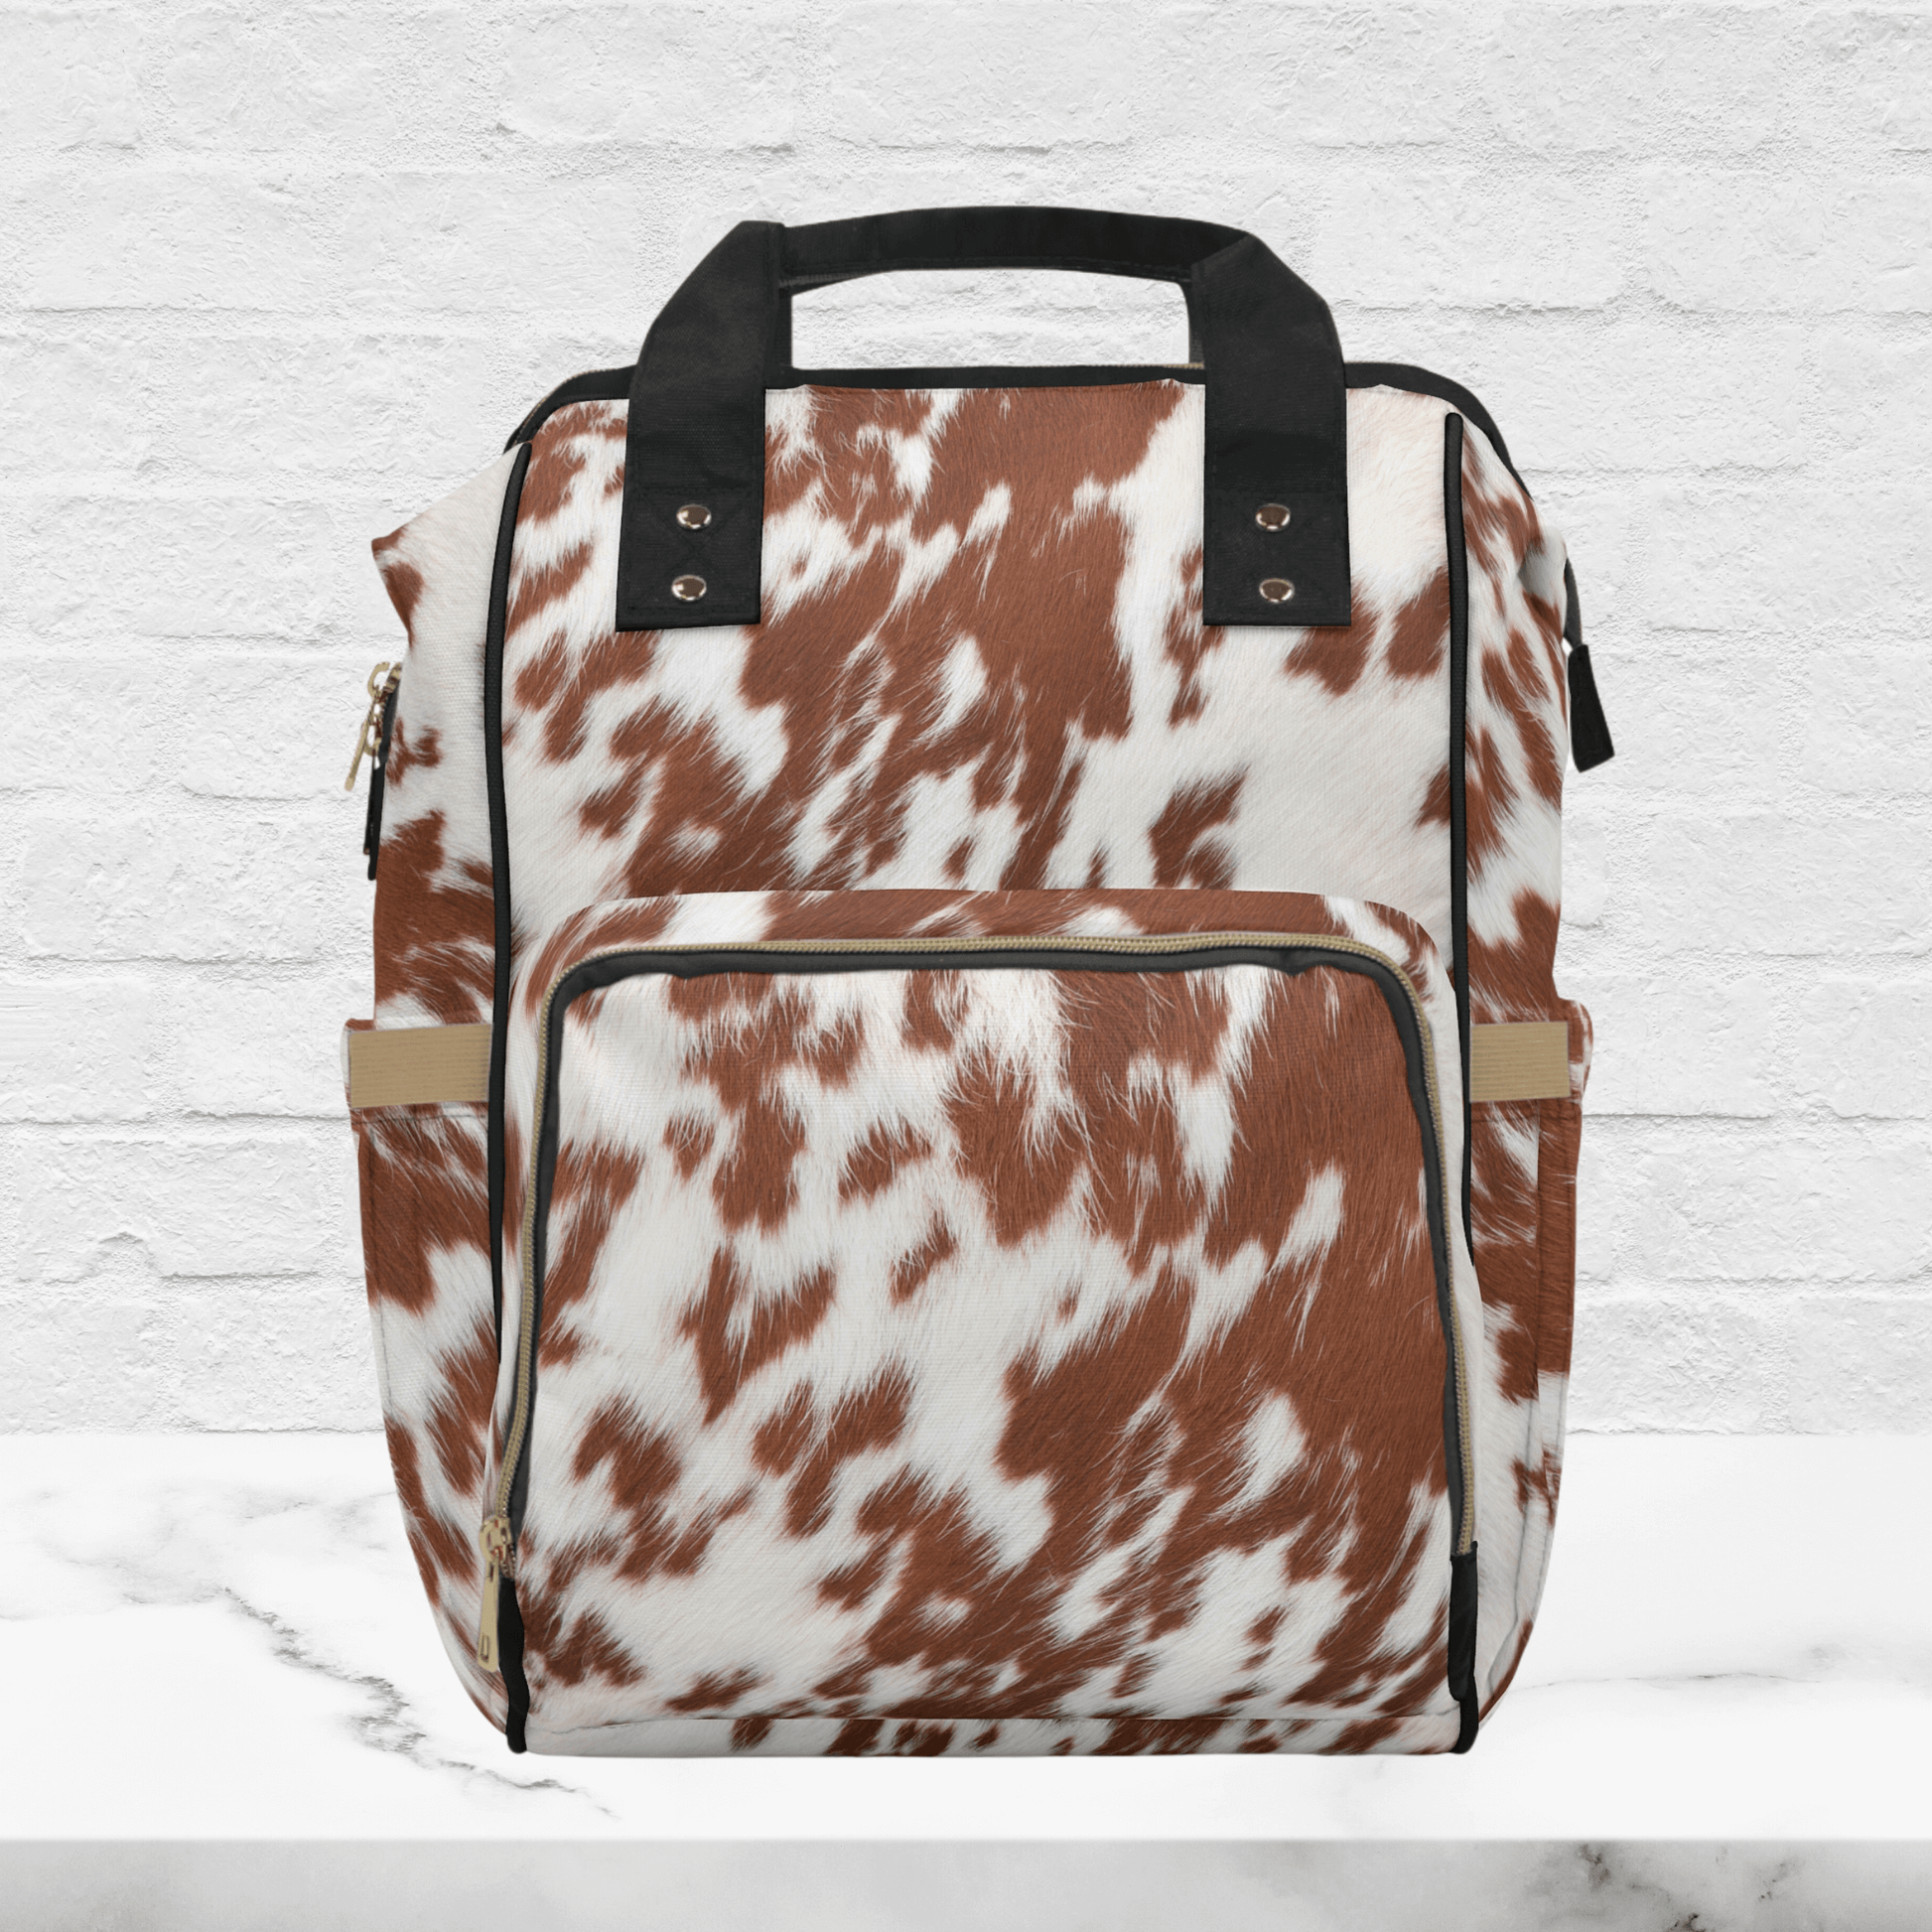 OUr rust and white colored cowhide print baby bag backpack can be ordered without the monogram initials.